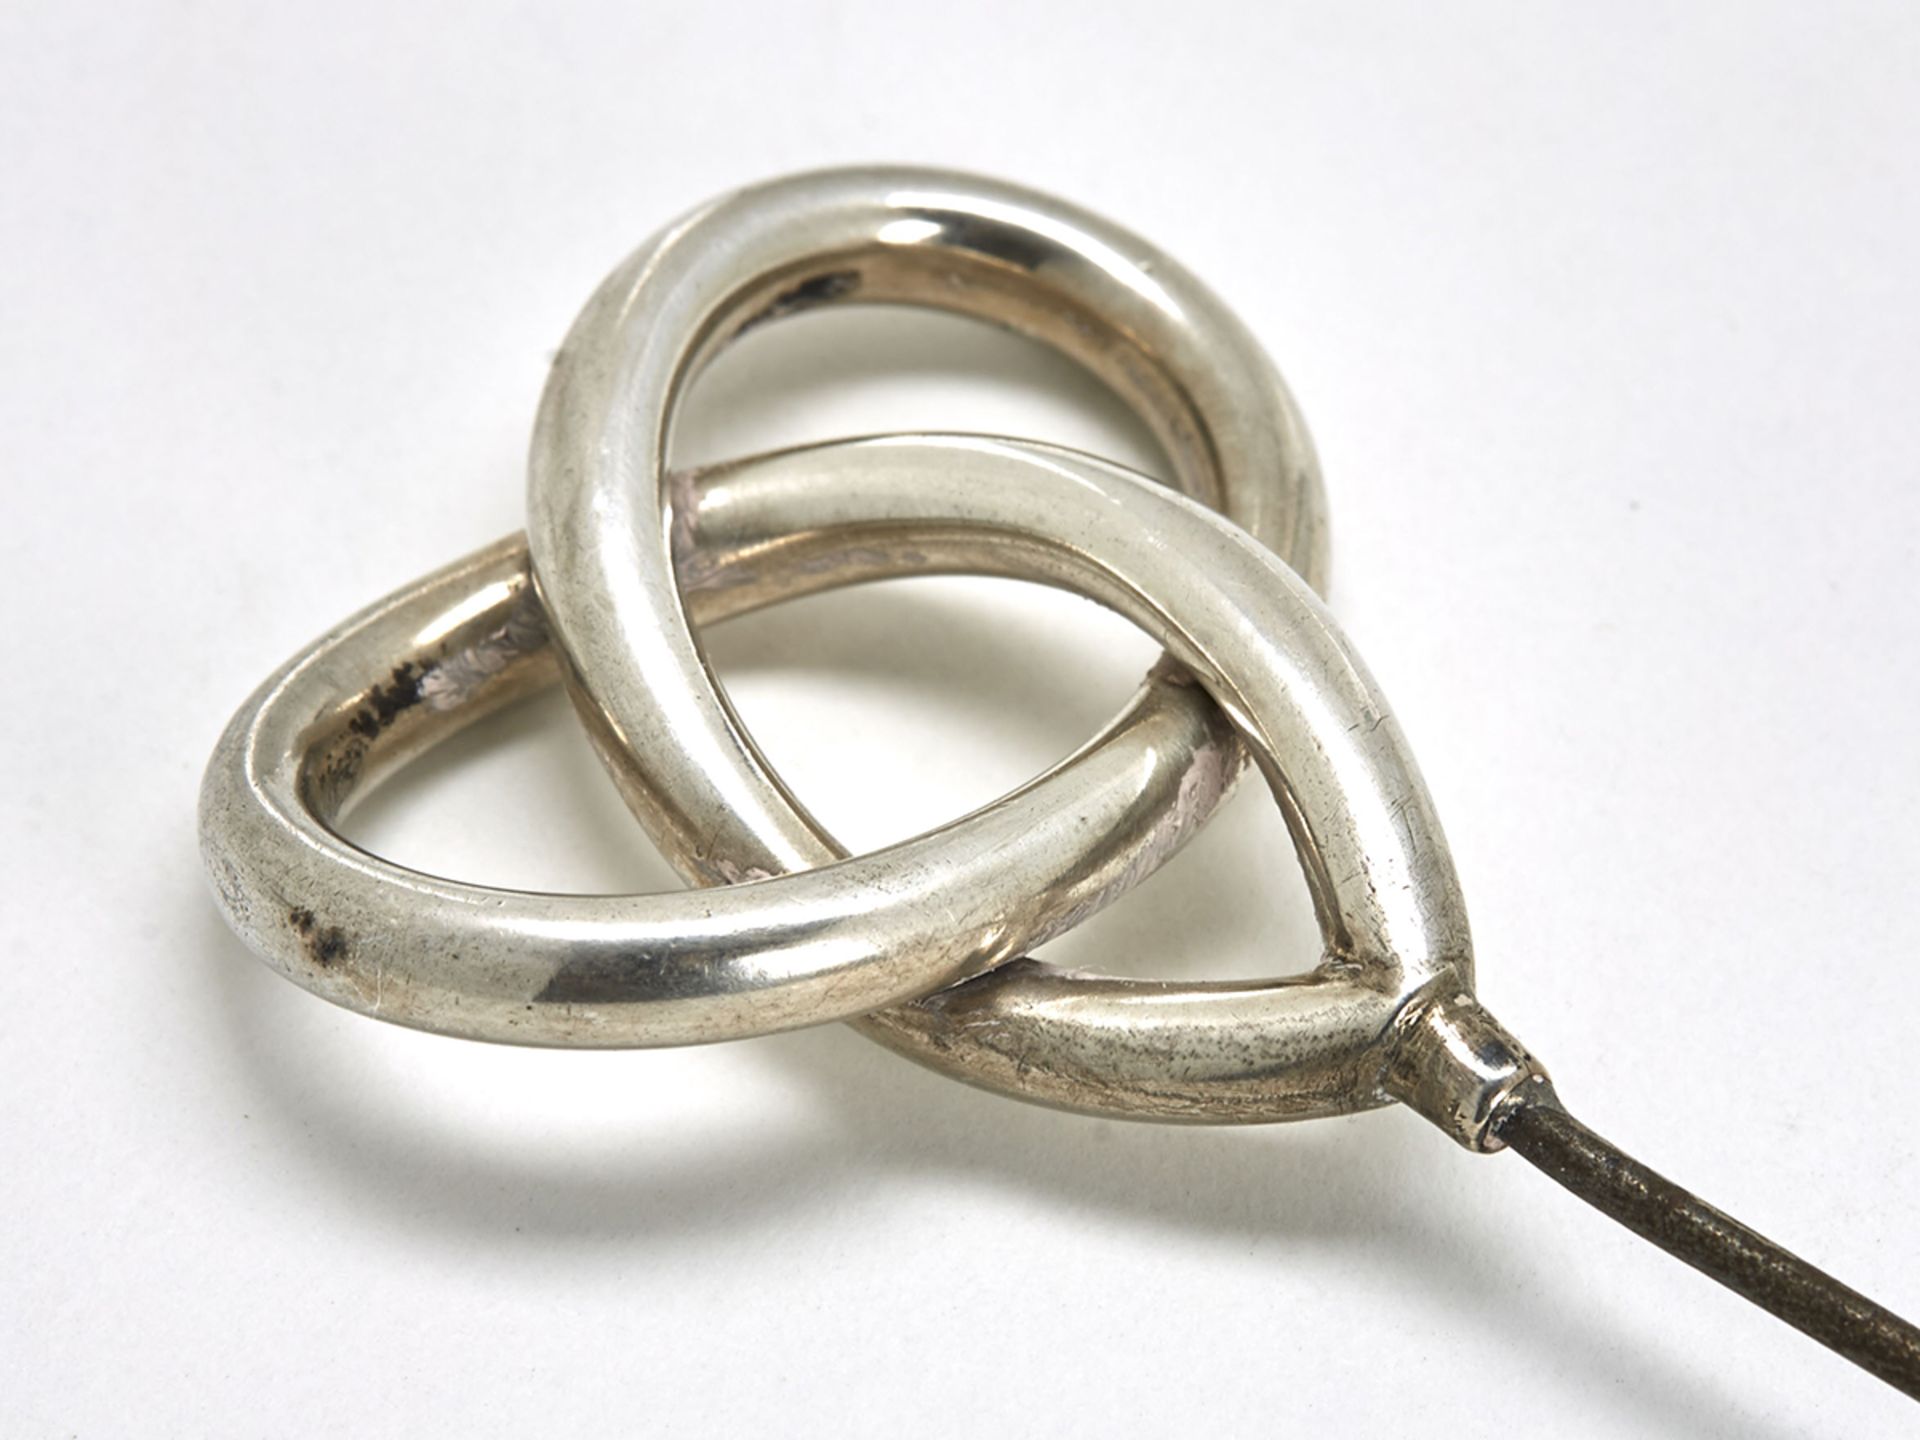 ART NOUVEAU CHARLES HORNER LARGE KNOT SILVER HATPIN c.1910   DIMENSIONS   Length 25cm   CONDITION - Image 3 of 3